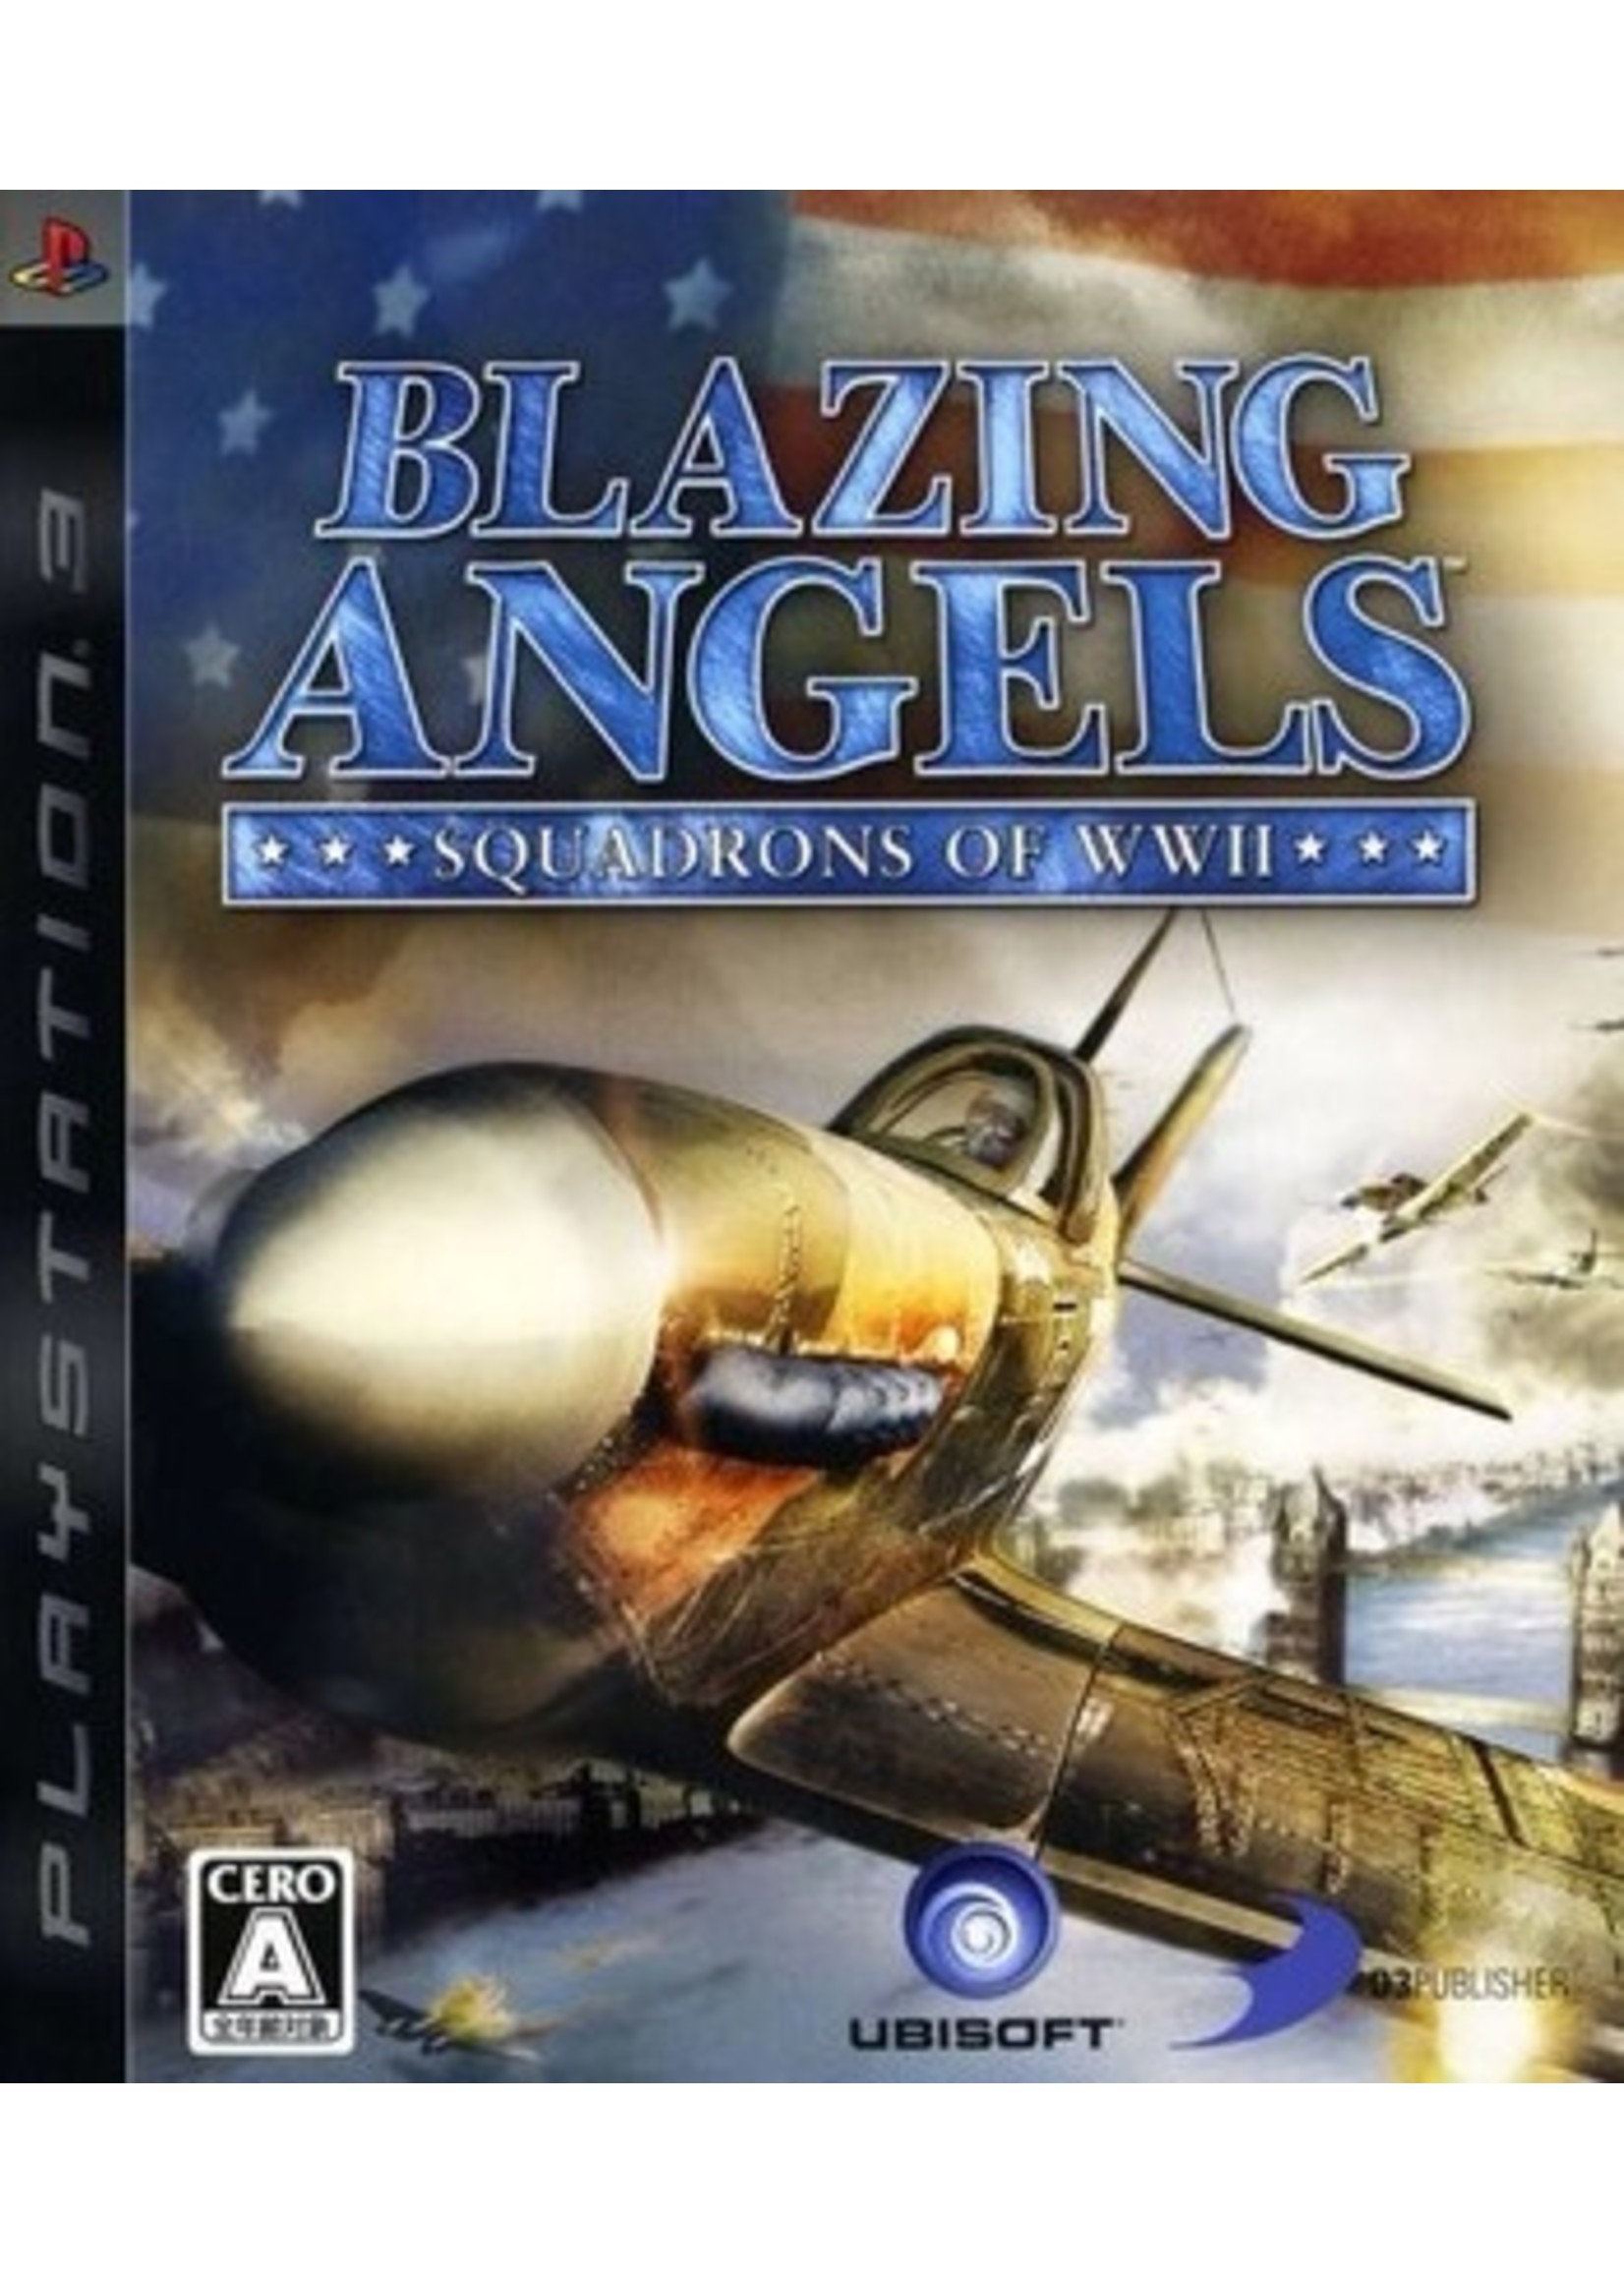 Sony Playstation 3 (PS3) Blazing Angels Squadrons of WWII